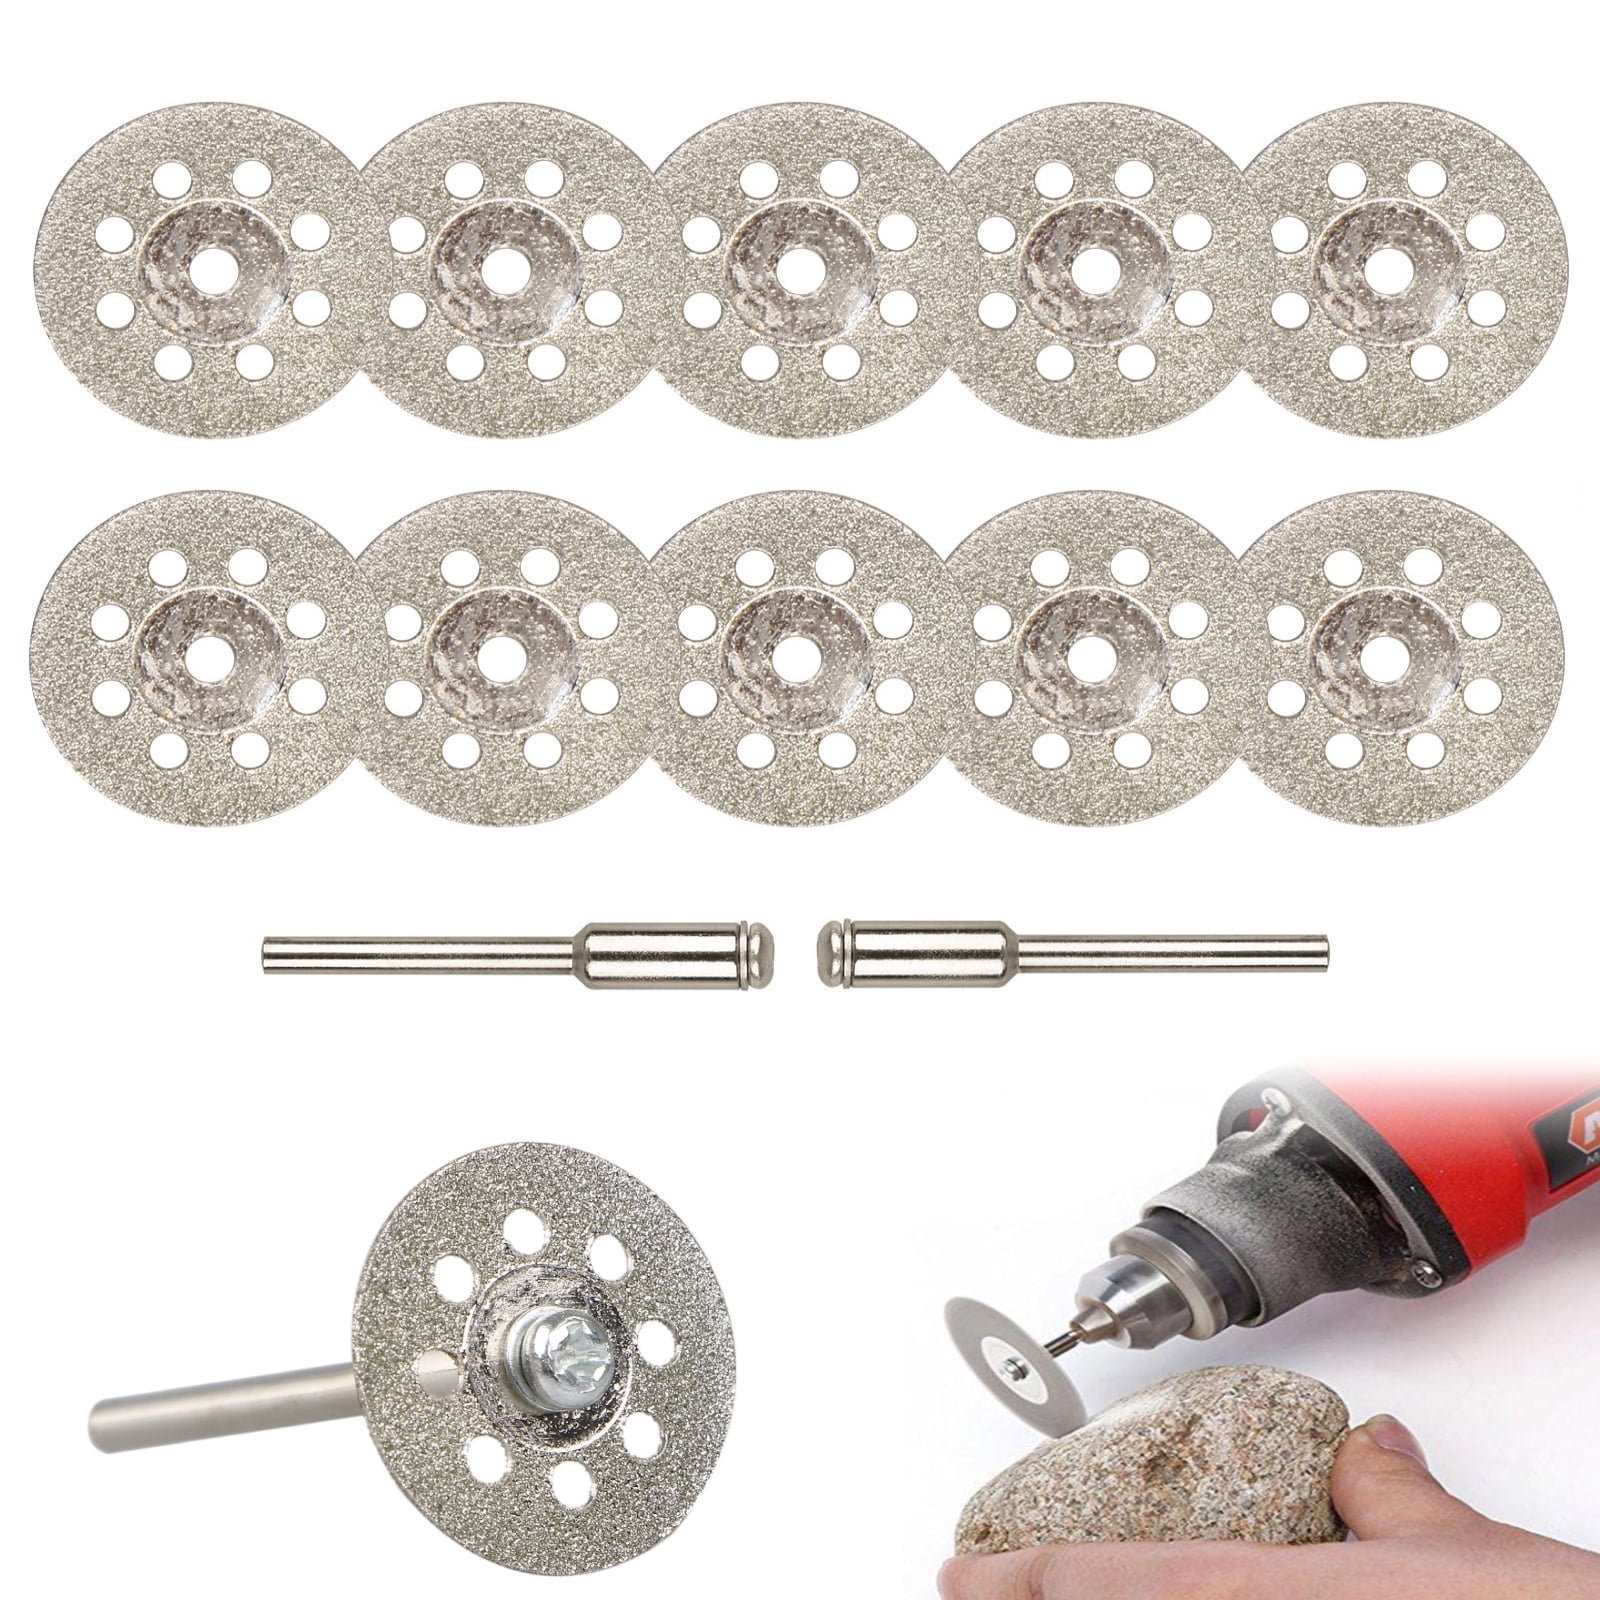 5Pcs Steel Mandrel with 1/4 Inch Shank for High Speed Cutting Discs Cut Off Wheels for Dremel Rotary Tools